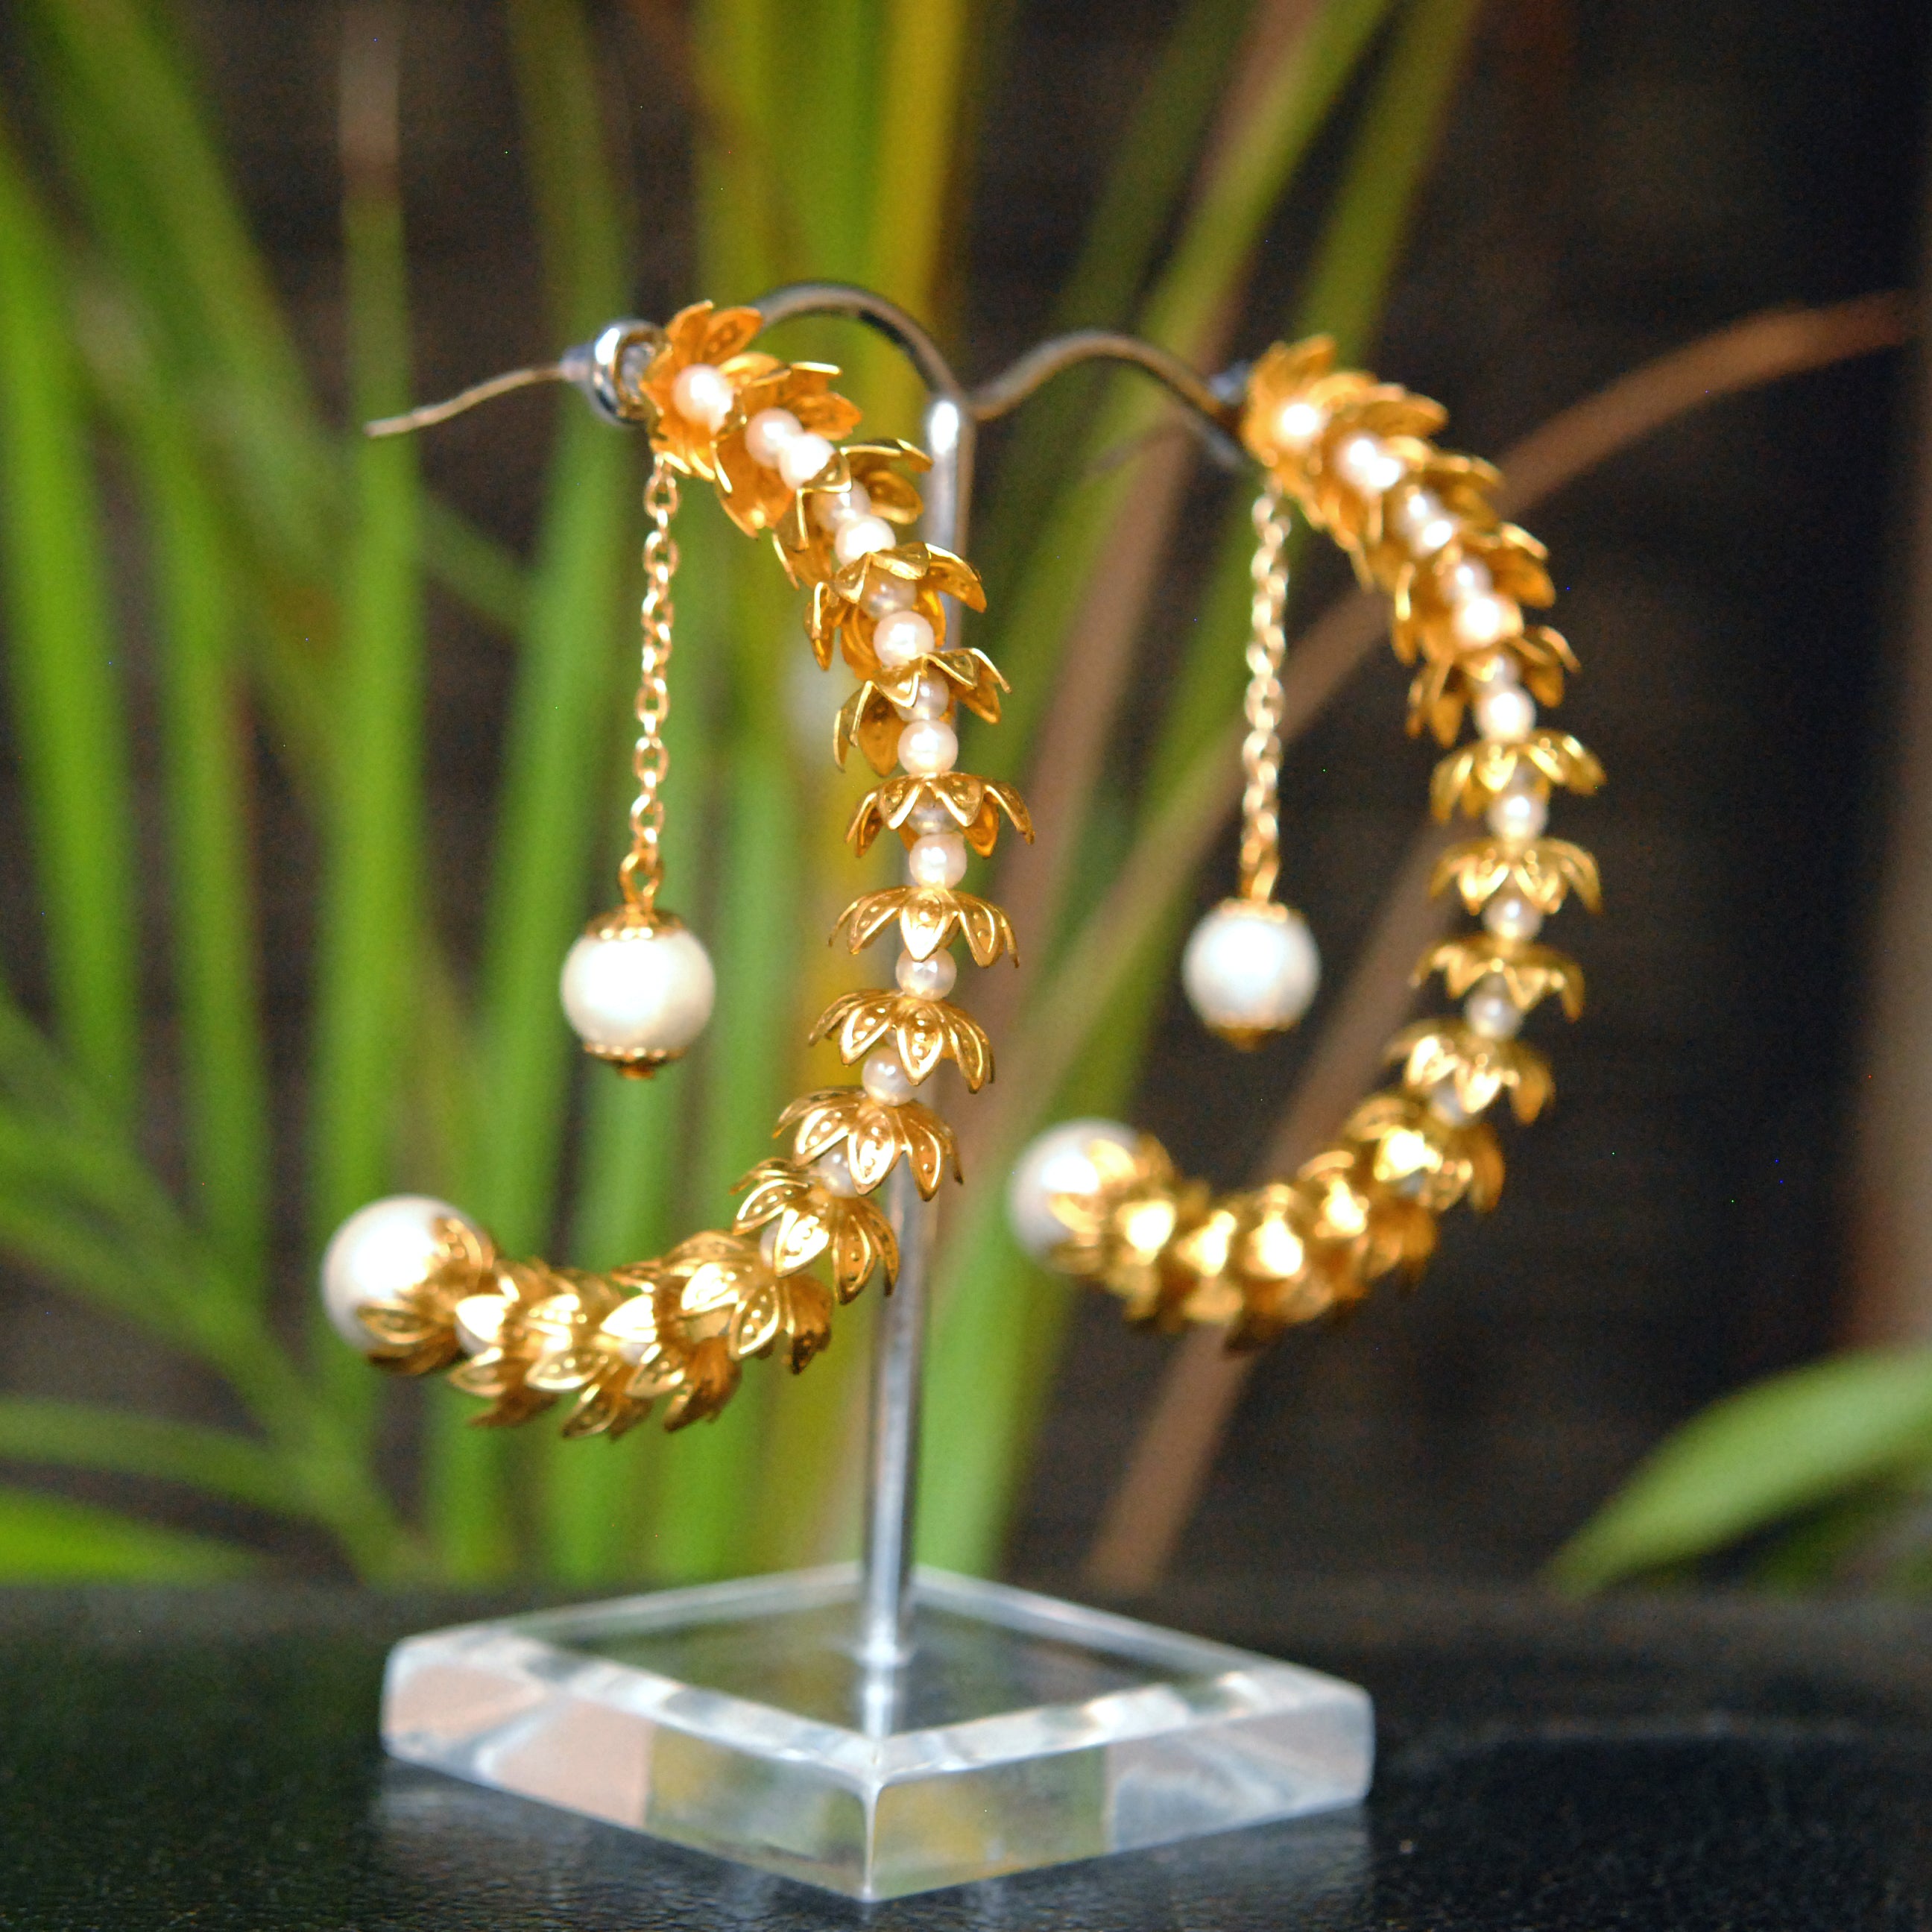 Beabhika Handmade Artificial Jewelry Gold Tone Hald Hoops Earrings Unique Stylish Fashion Jewelry For Gen Z Fashion Stylish Statement Earrings Bollywood Fashion jewelry Available On COD In India Delhi Golden Color Half Hoops White Color Pearls Dangling Pearl Earrings Traditional Heeramandi Style Jewelry